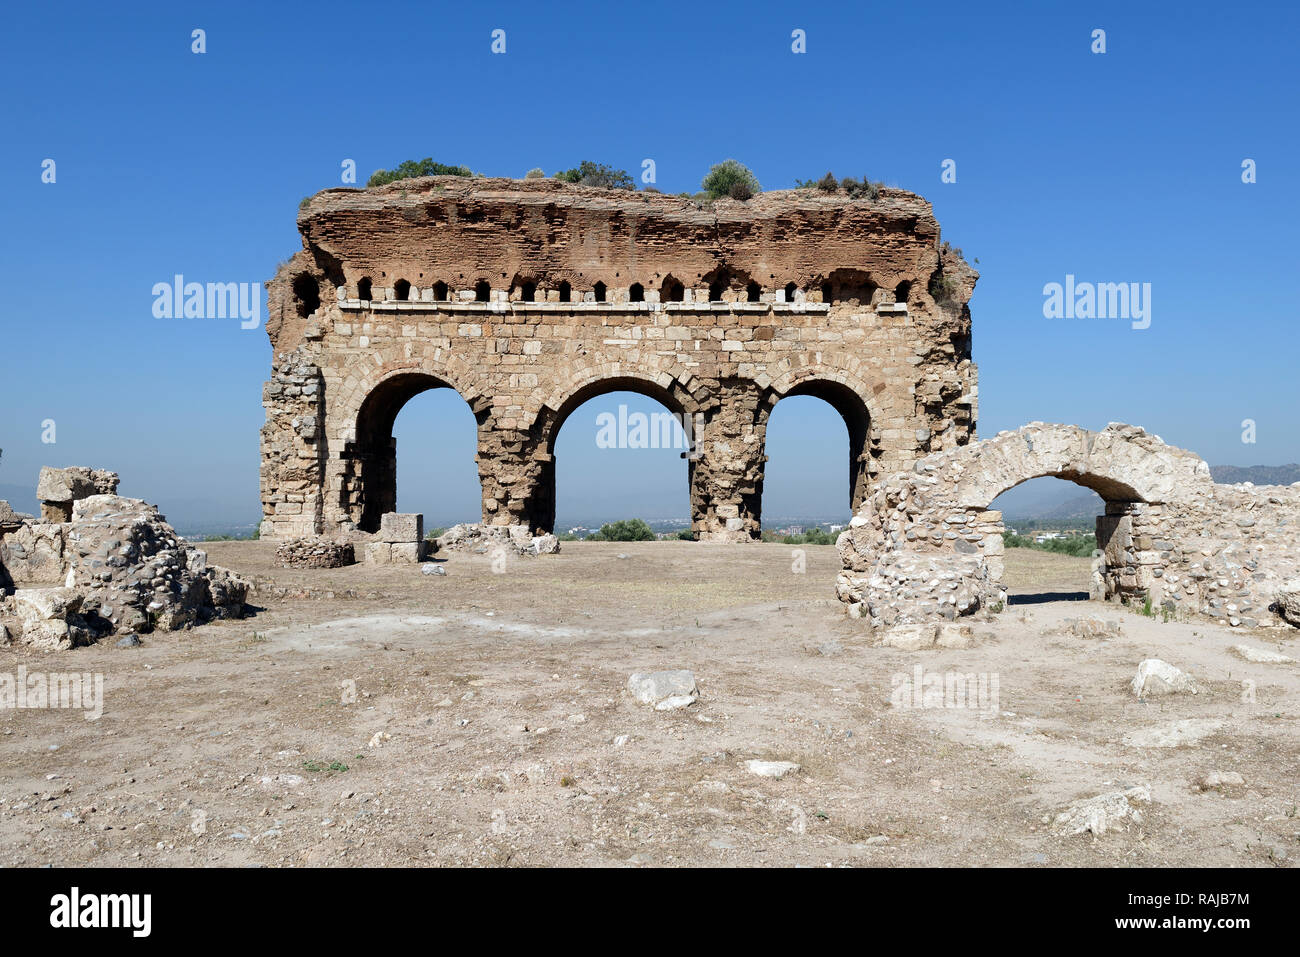 The imposing three arched structure that is part of the Bath-Gymnasium complex, ancient city of Tralleis, Aydin, Anatolia, Turkey. Dated to the 3rd ce Stock Photo